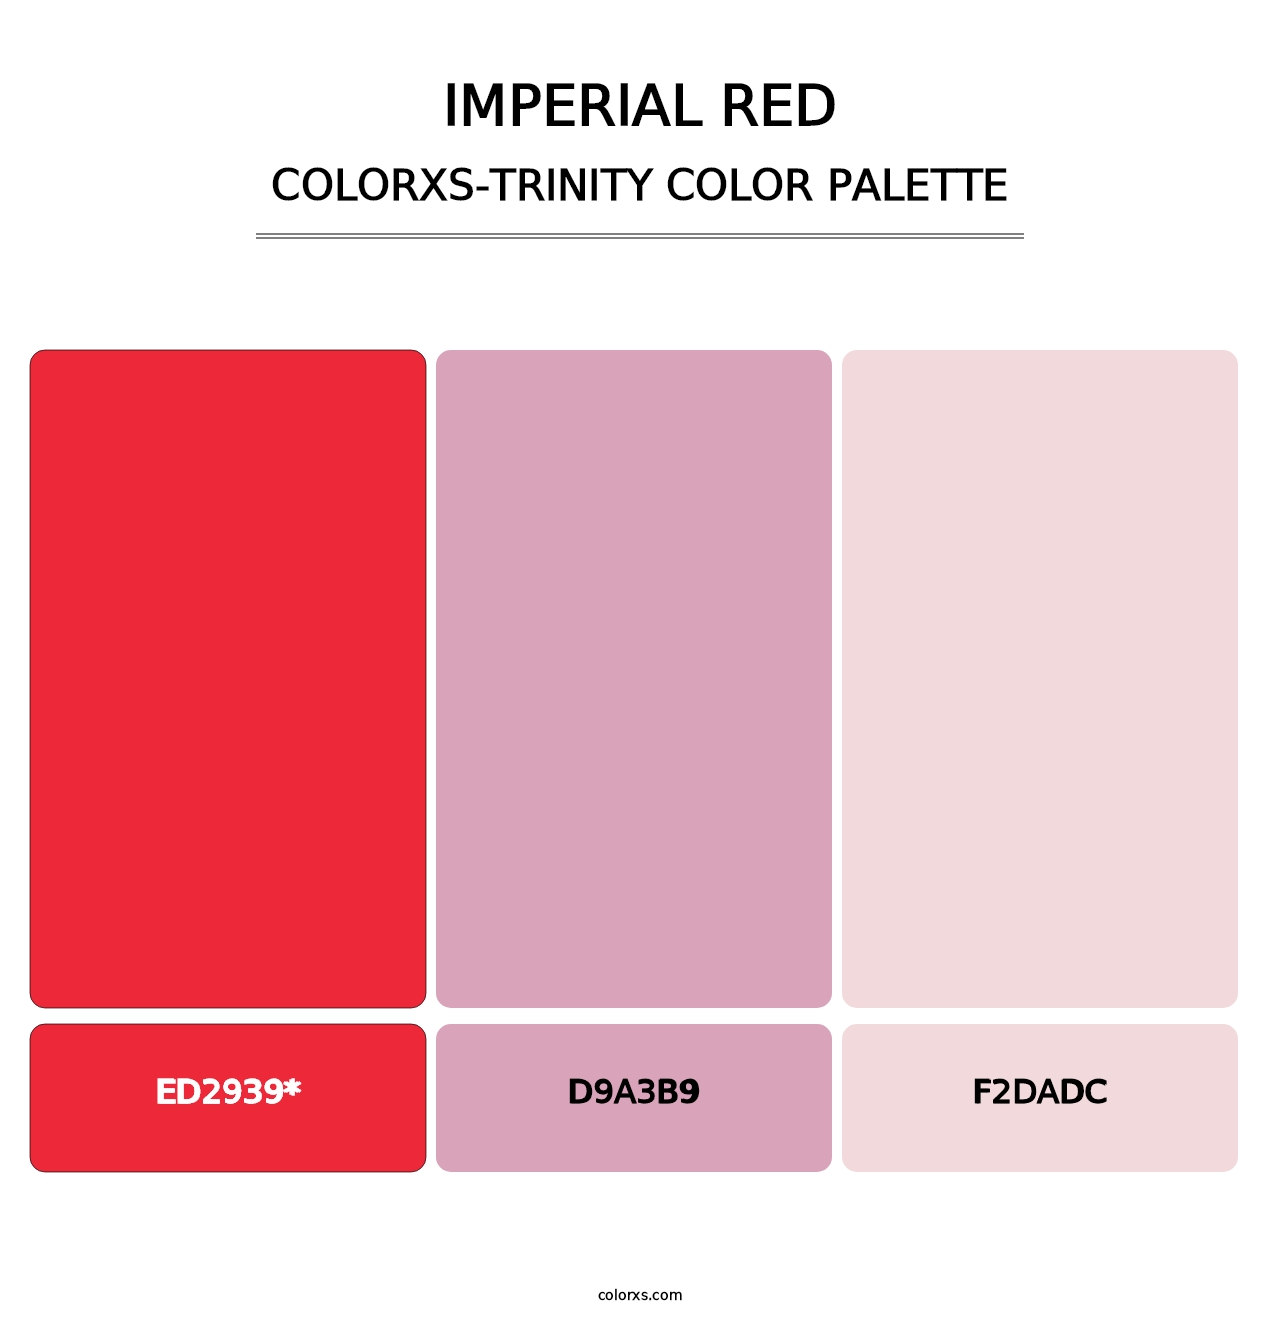 Imperial Red - Colorxs Trinity Palette